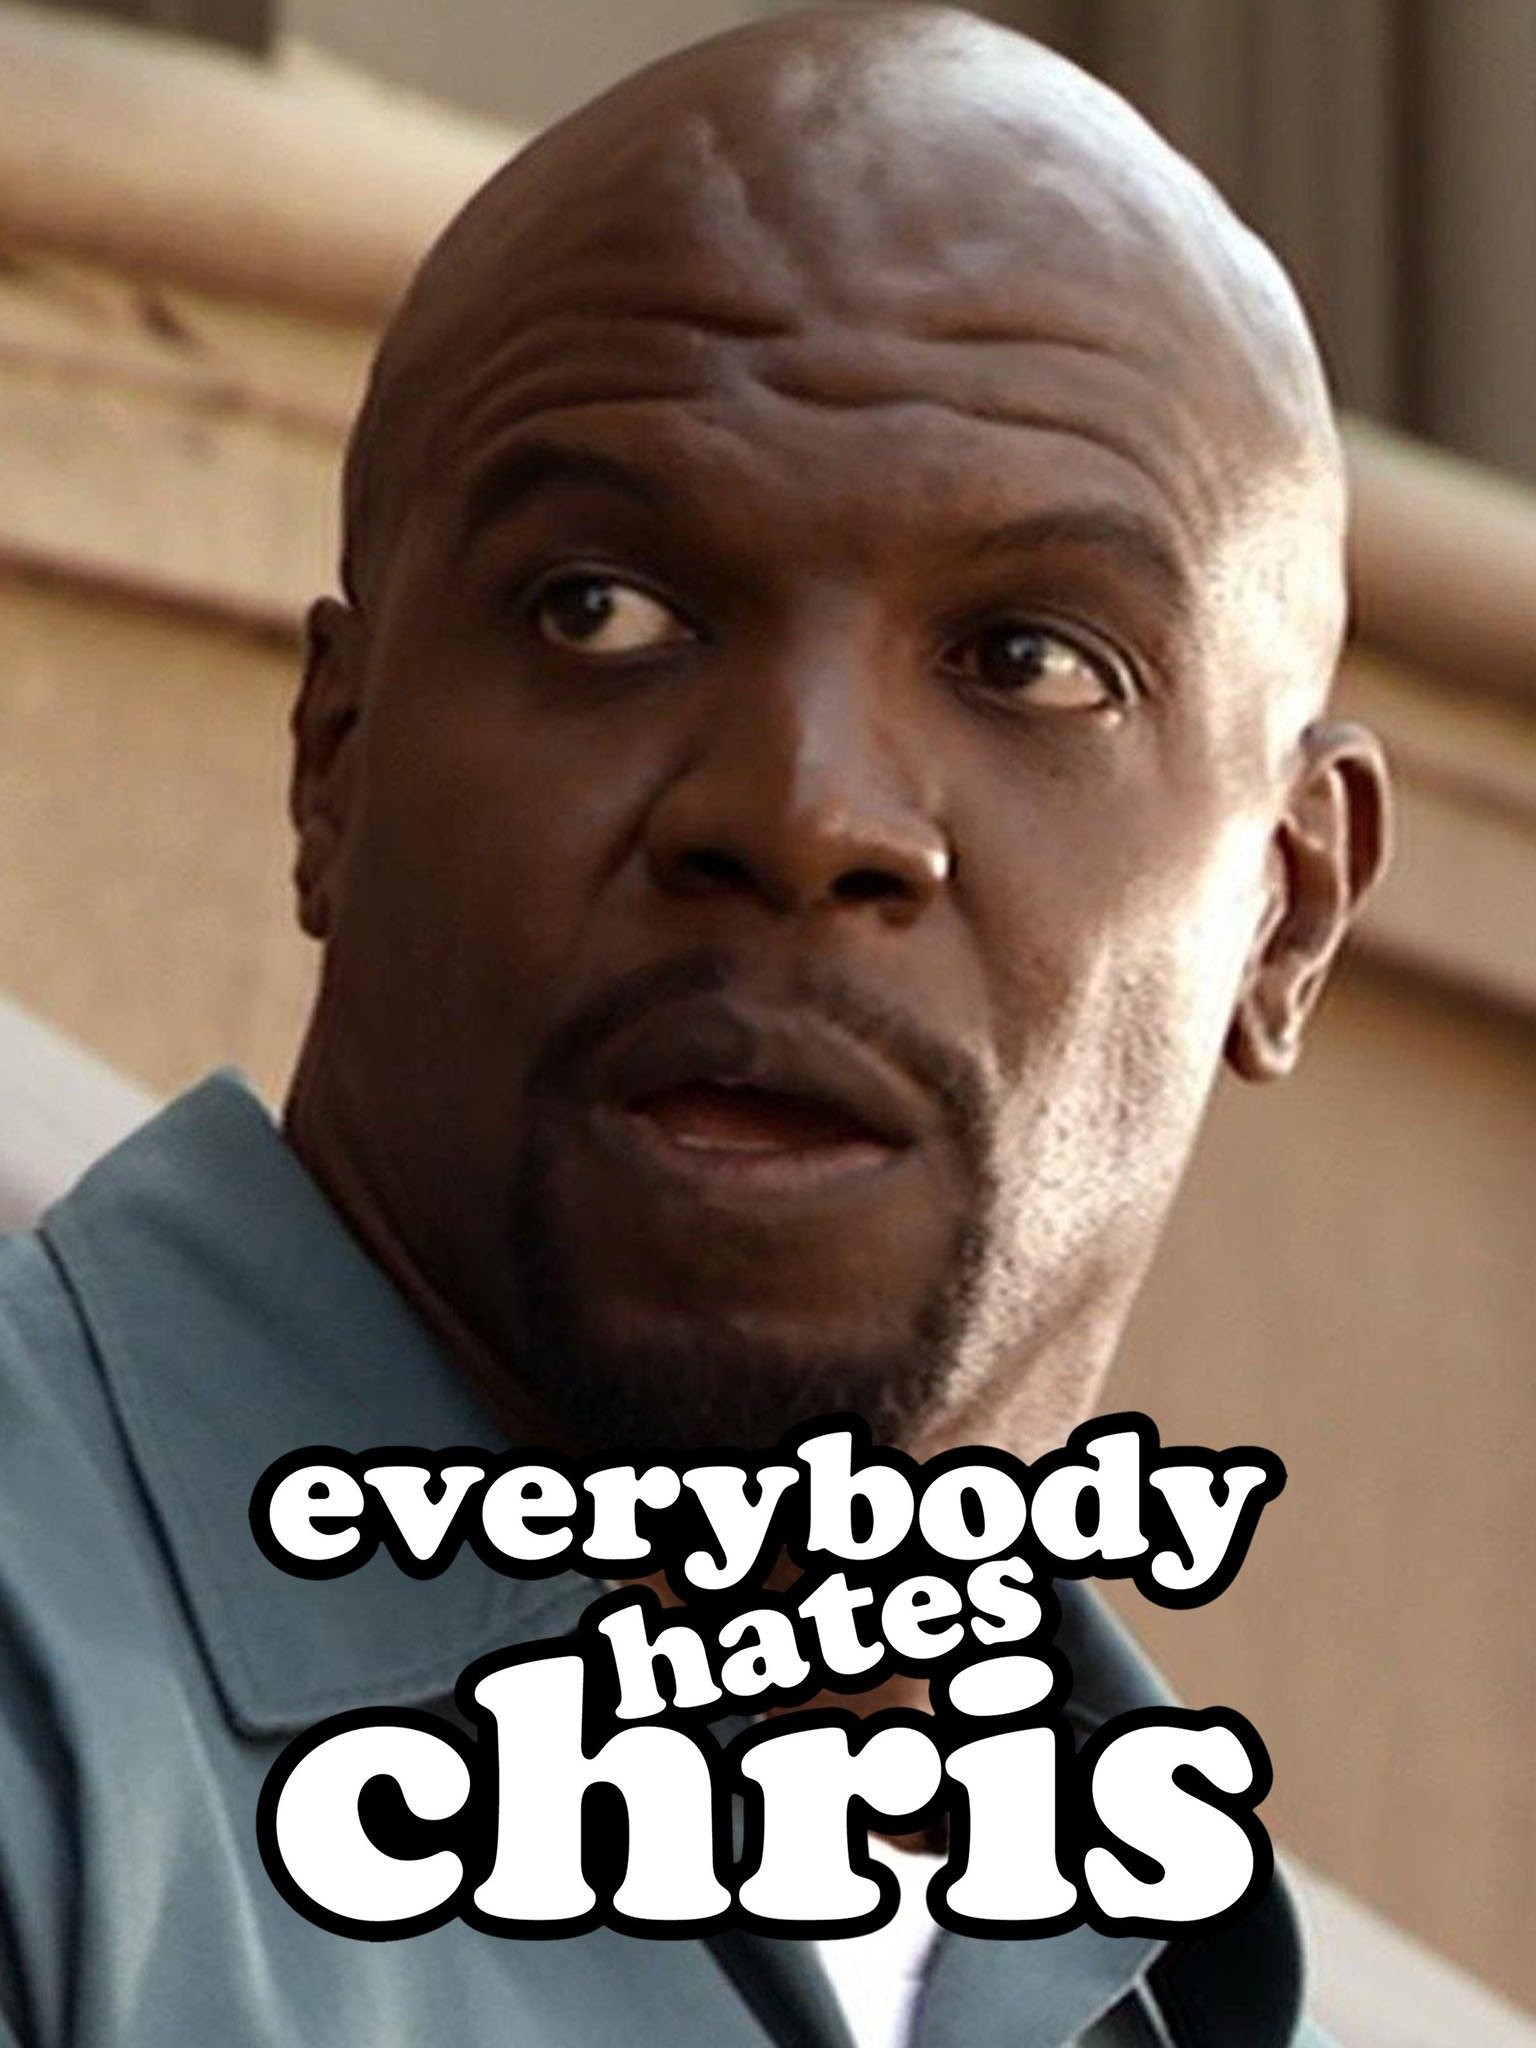 Watch Everybody Hates Chris S1:E8 - EVERYBODY HATES THE BABYSITTER